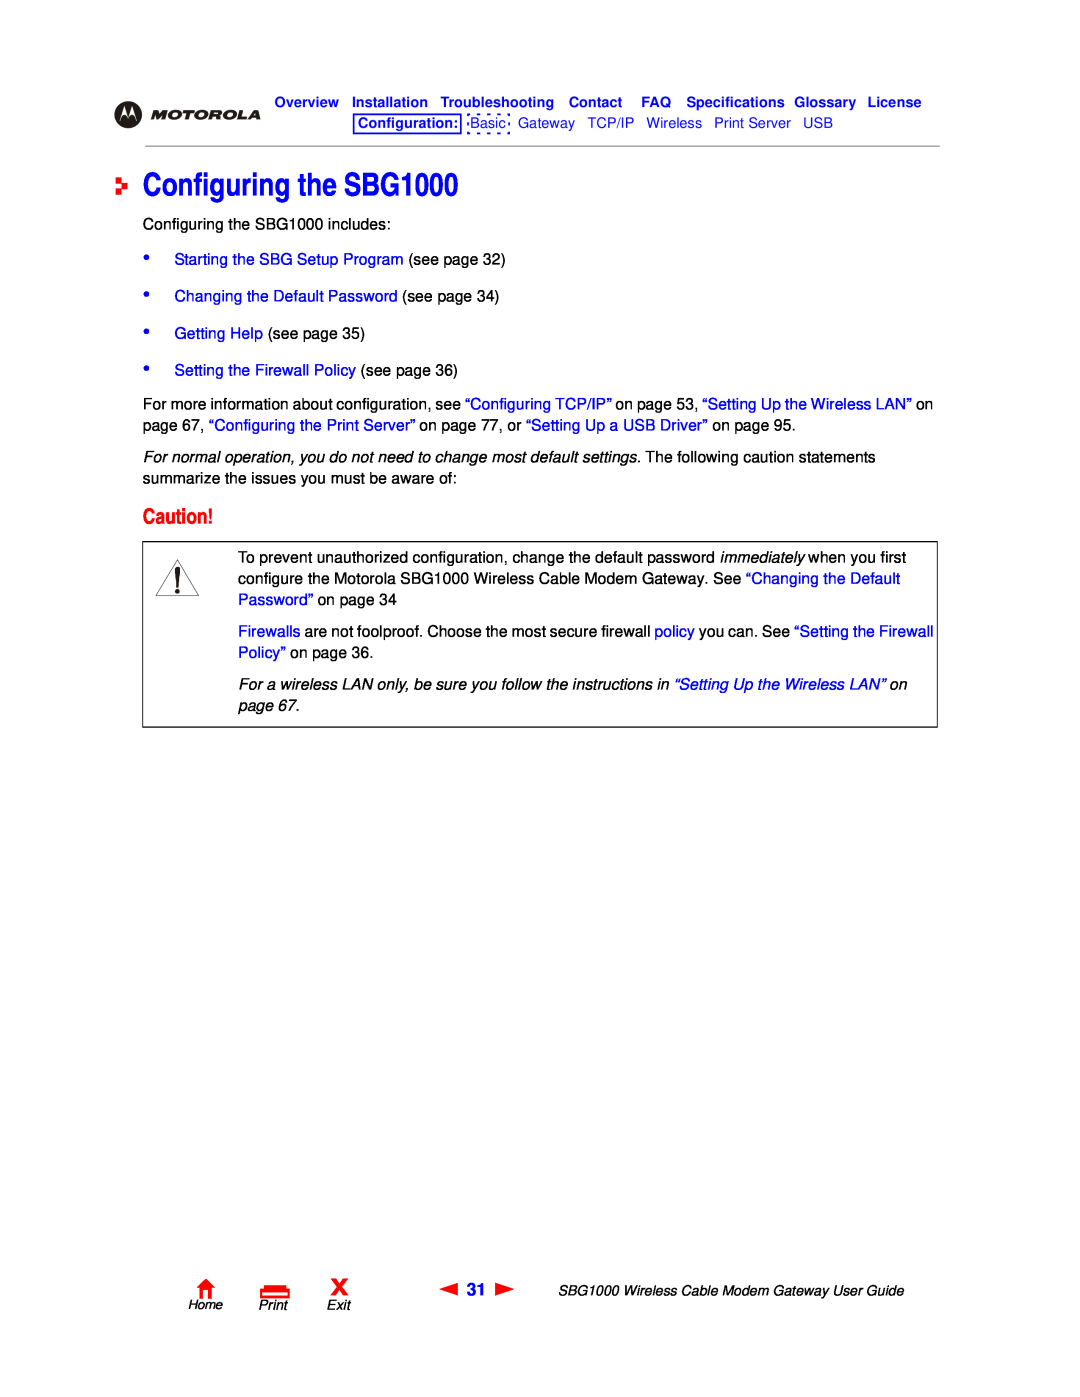 Motorola manual Configuring the SBG1000, Starting the SBG Setup Program see page, Setting the Firewall Policy see page 